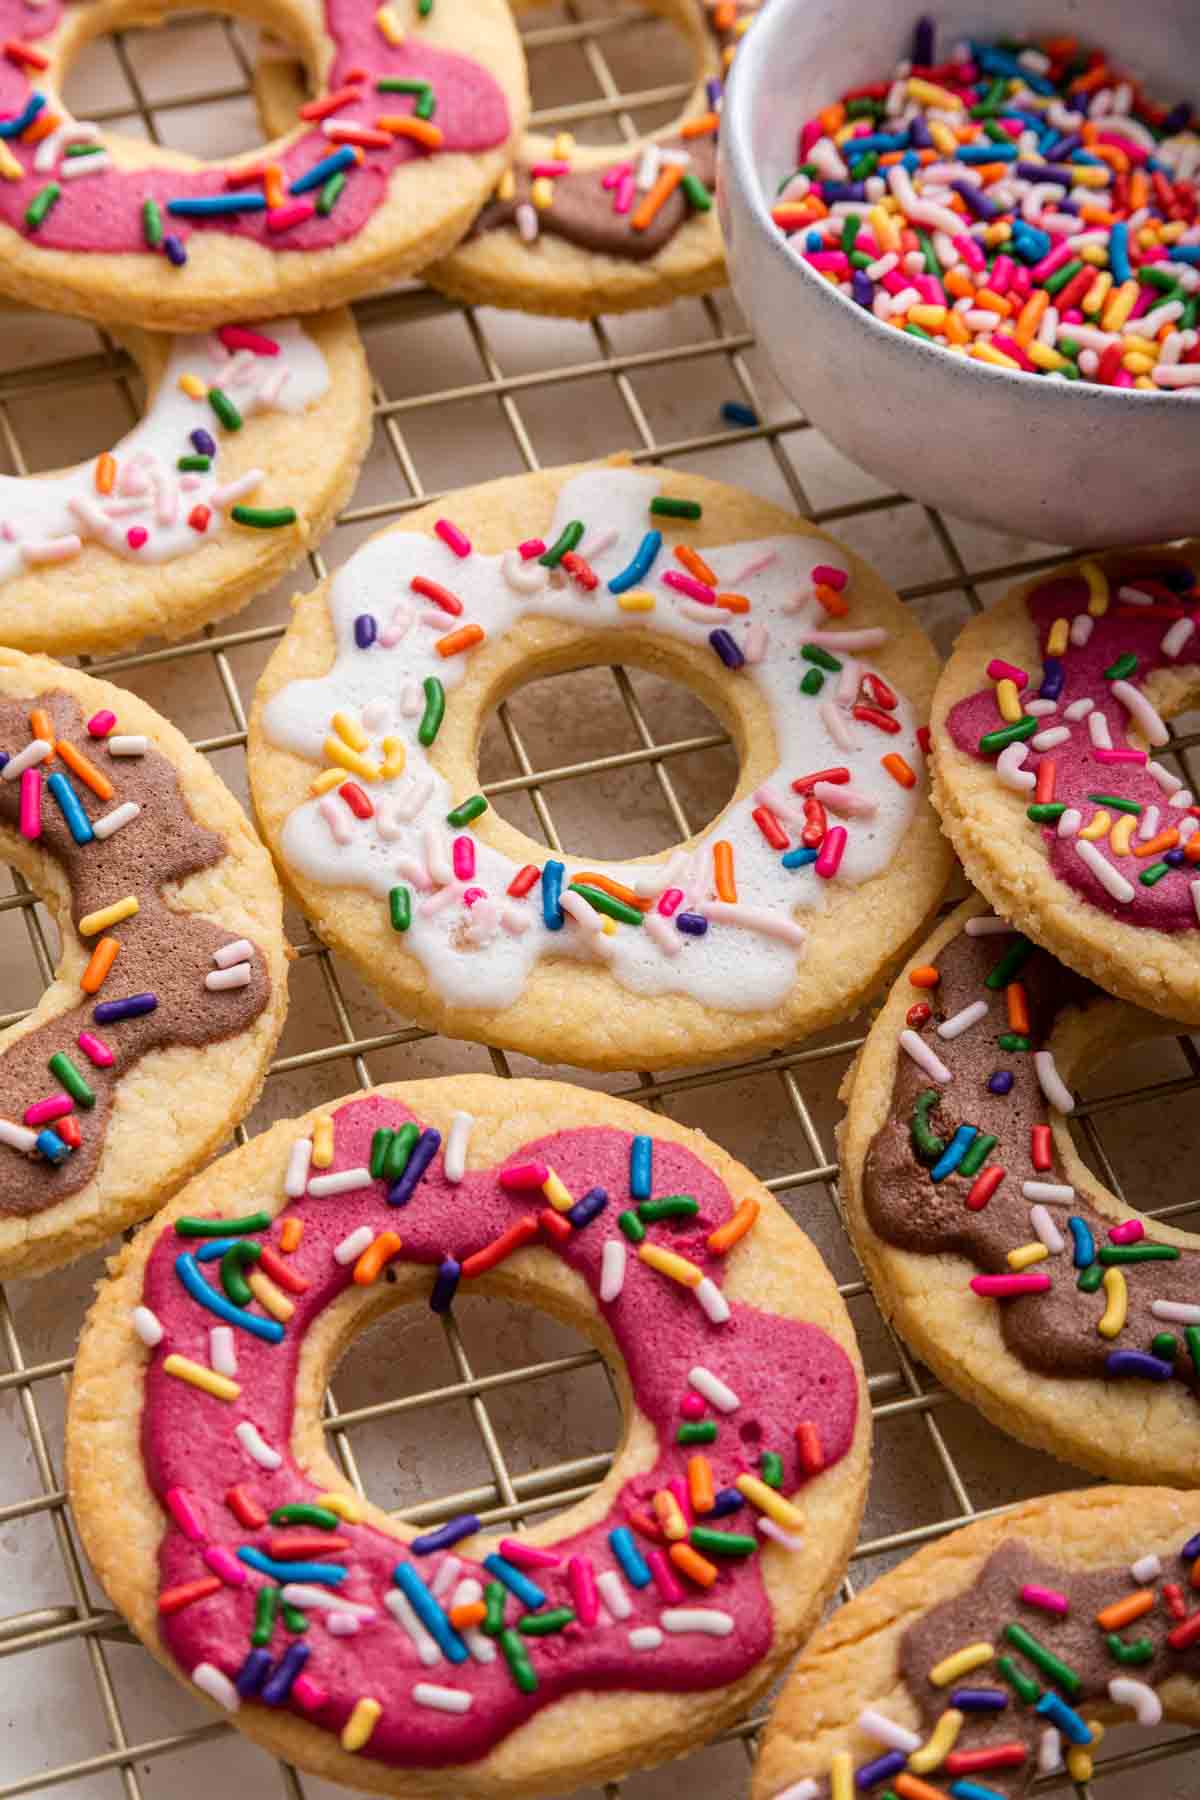 Donut cookies with pink, white and brown frosting and sprinkles on a wire rack.